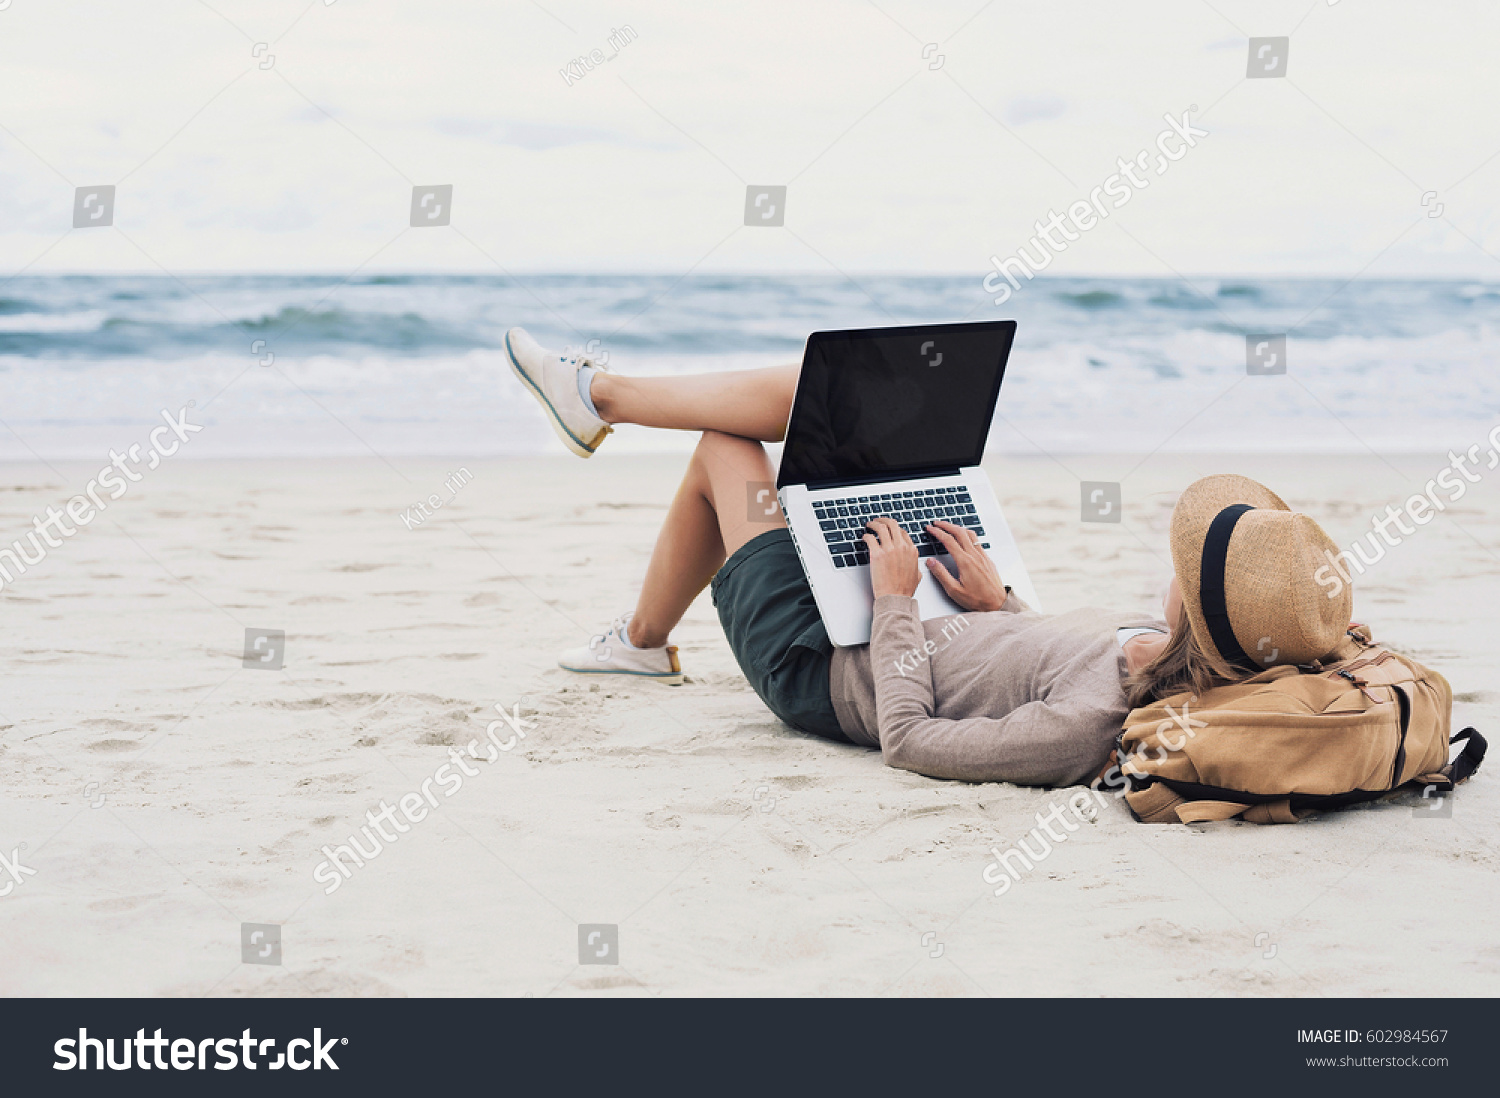 Young woman working, using laptop computer on a beach. Freelance work, vacations, distance work, social distancing, e-learning, connection, creative professional, new business, meeting online concept #602984567